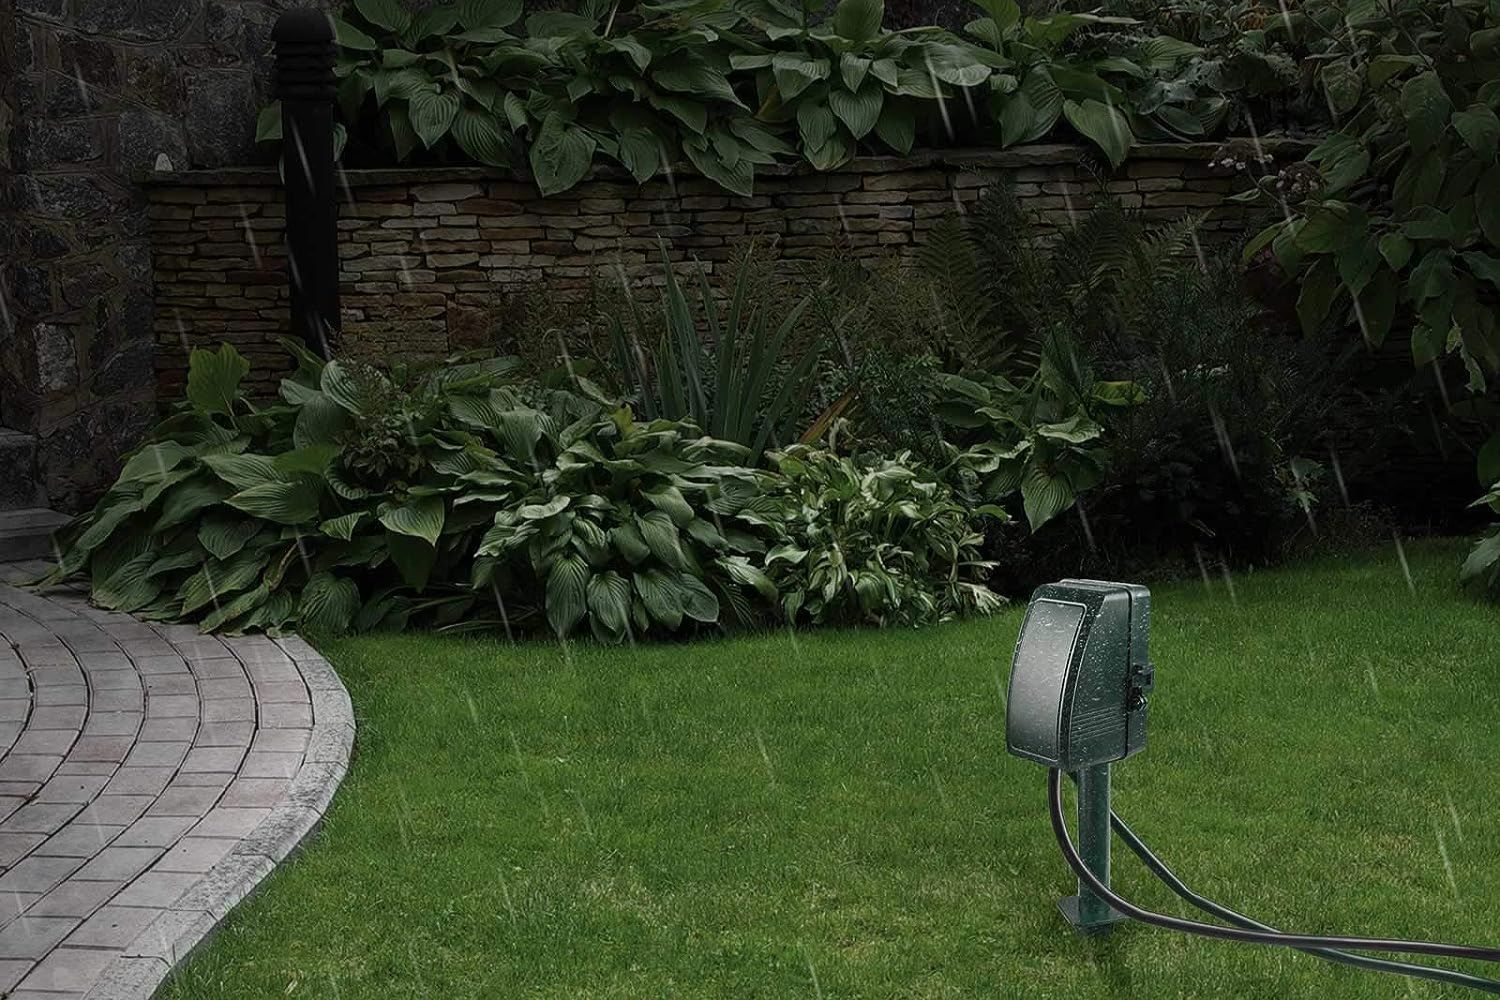 The best pool timer option getting rained on while installed in a yard